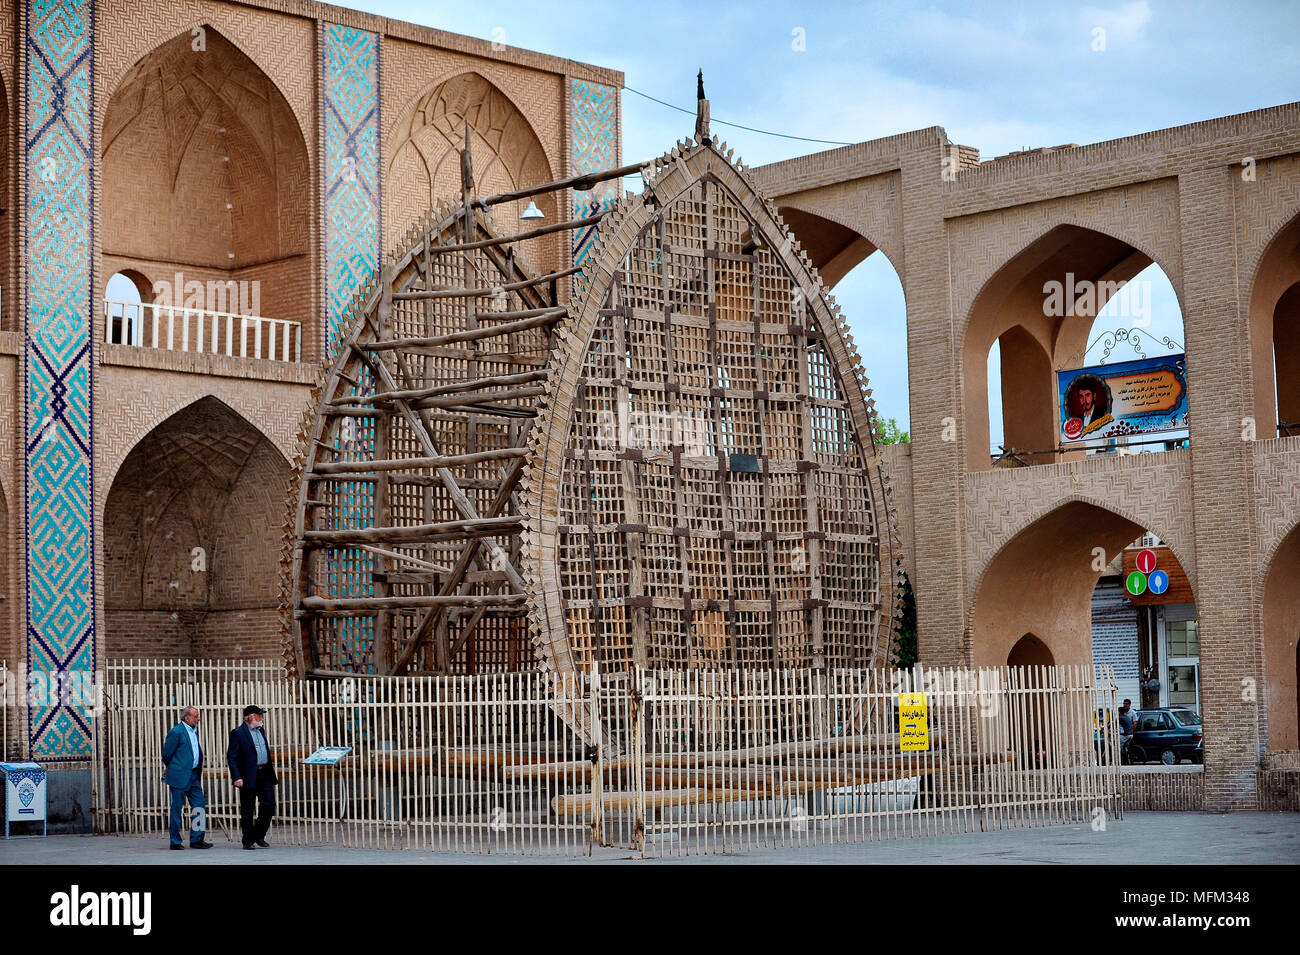 Nakhl Gardani, a wooden construction used during Ashura procession, for commemorating the death of third Shia Imam. Amir Chaqmaq Square - Yazd, Iran. Stock Photo